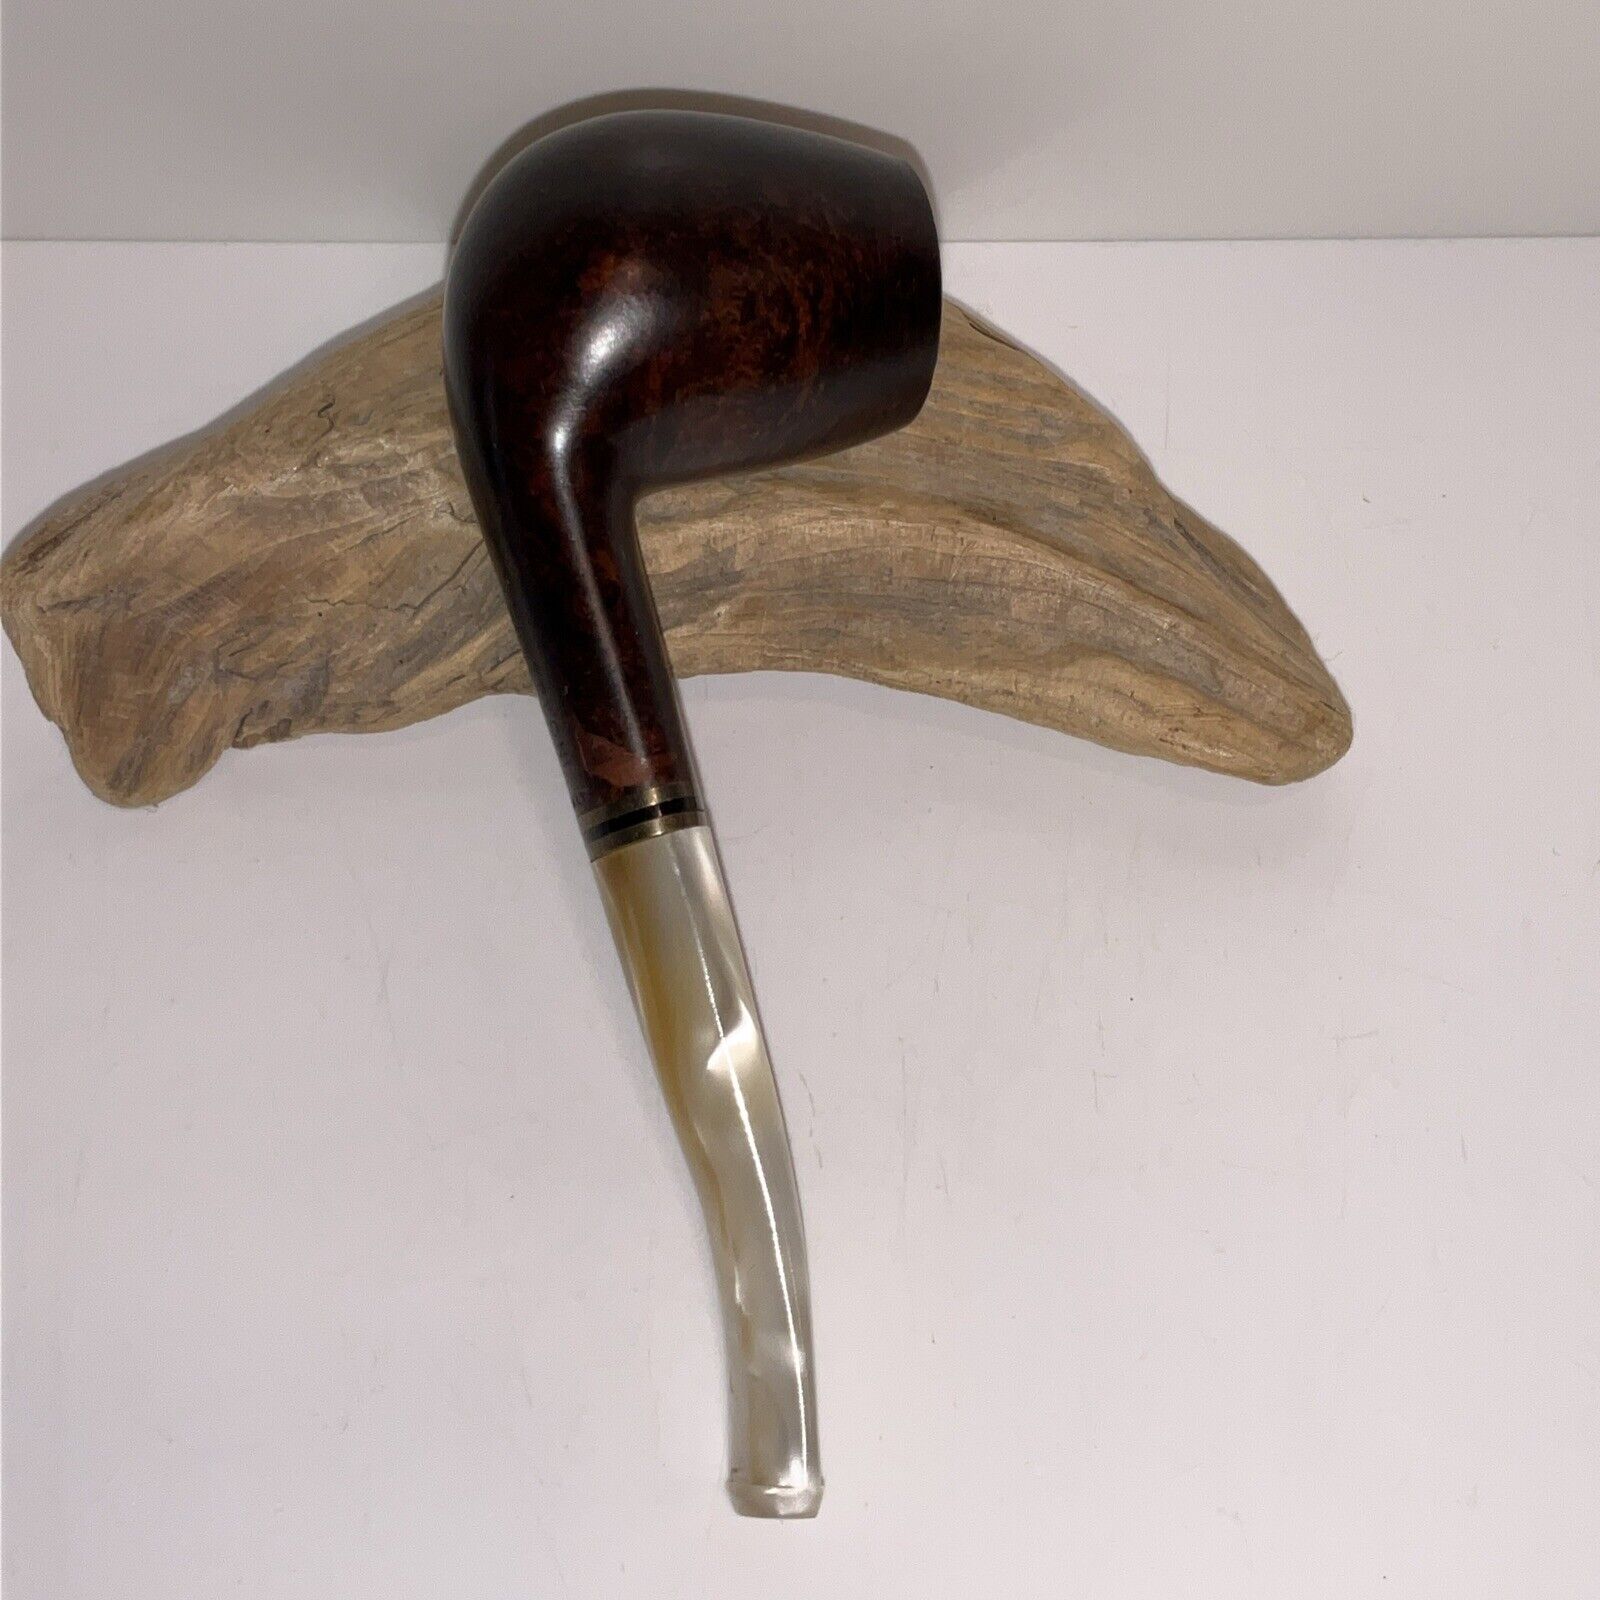 STUNNING CASSELONI FERRERA 710 ESTATE PIPE ITALY Mother Of Pearl  HAND MADE 